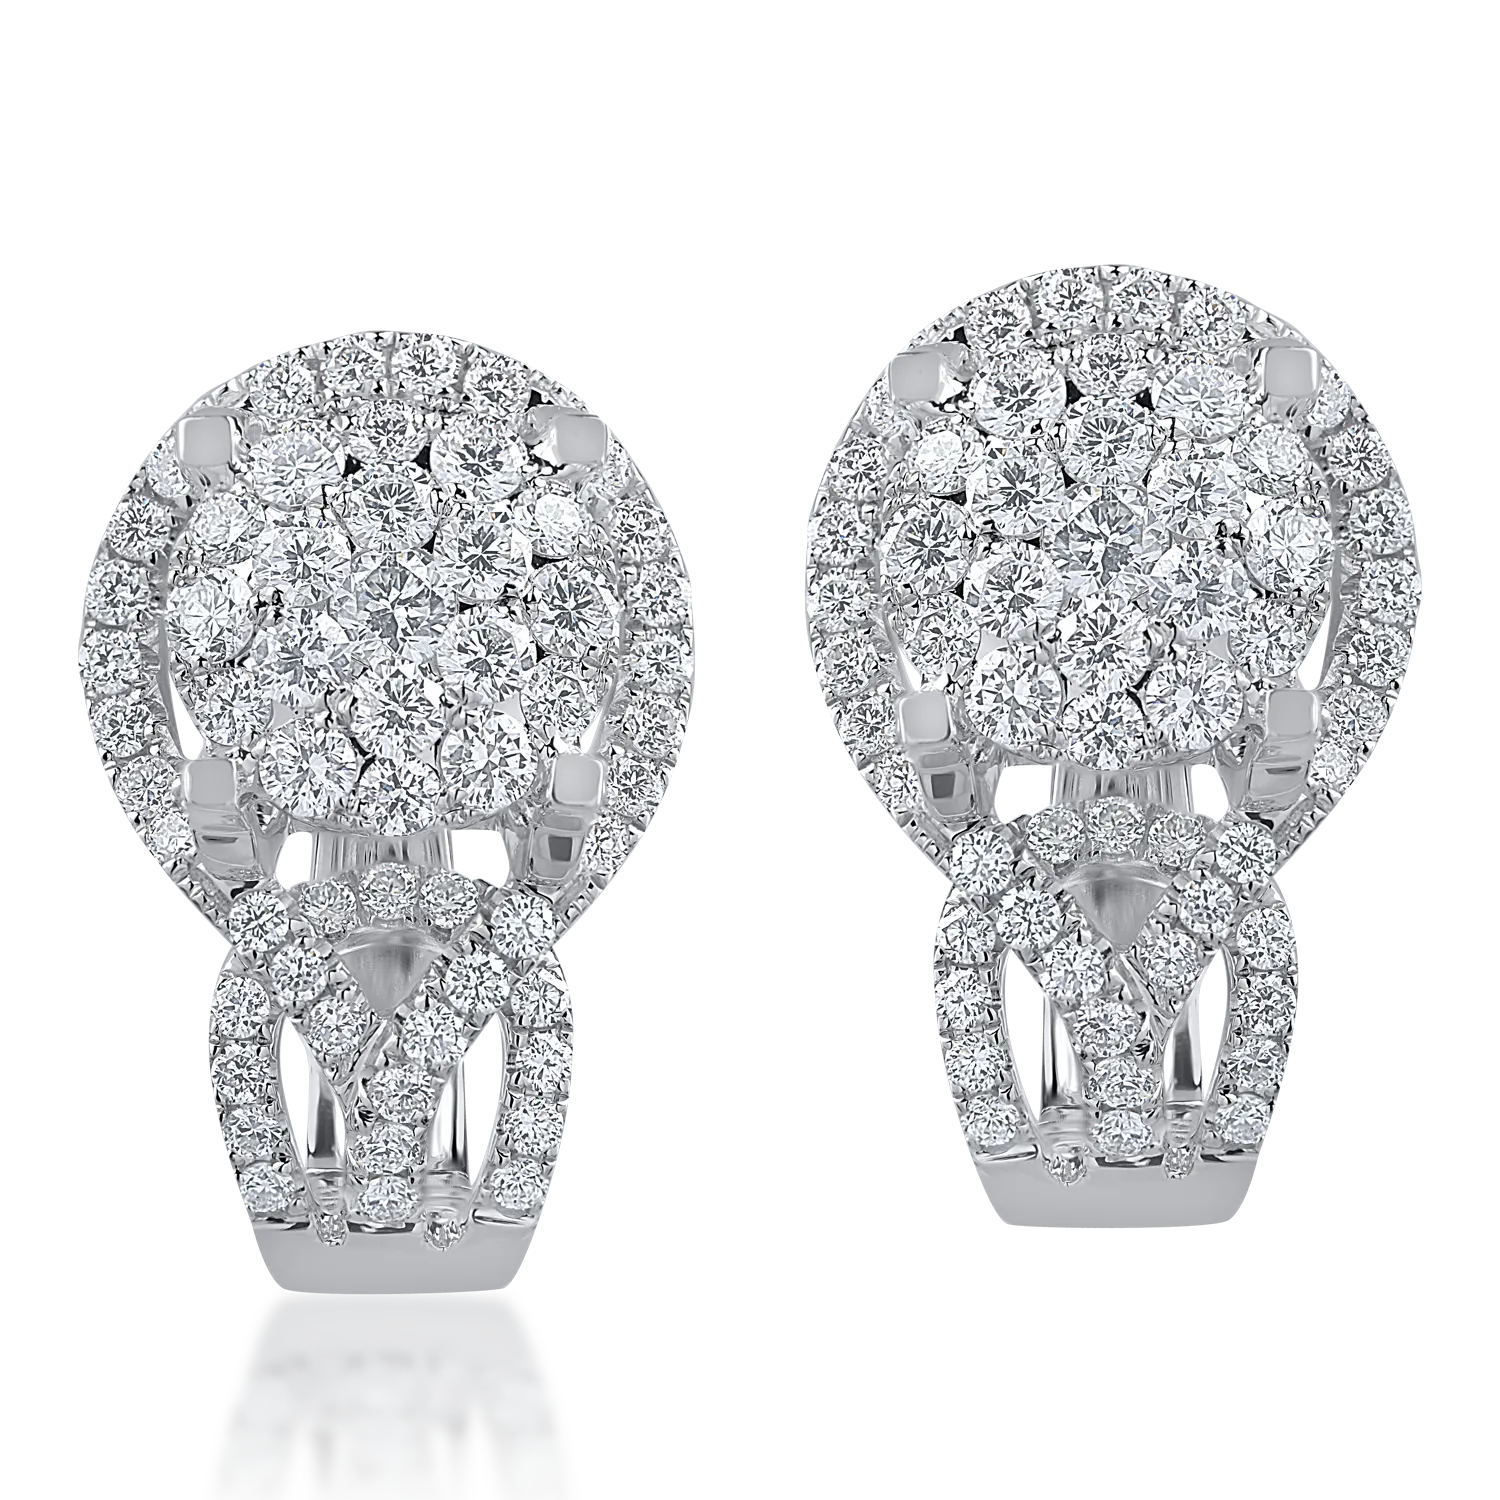 White gold earrings with 0.92ct diamonds